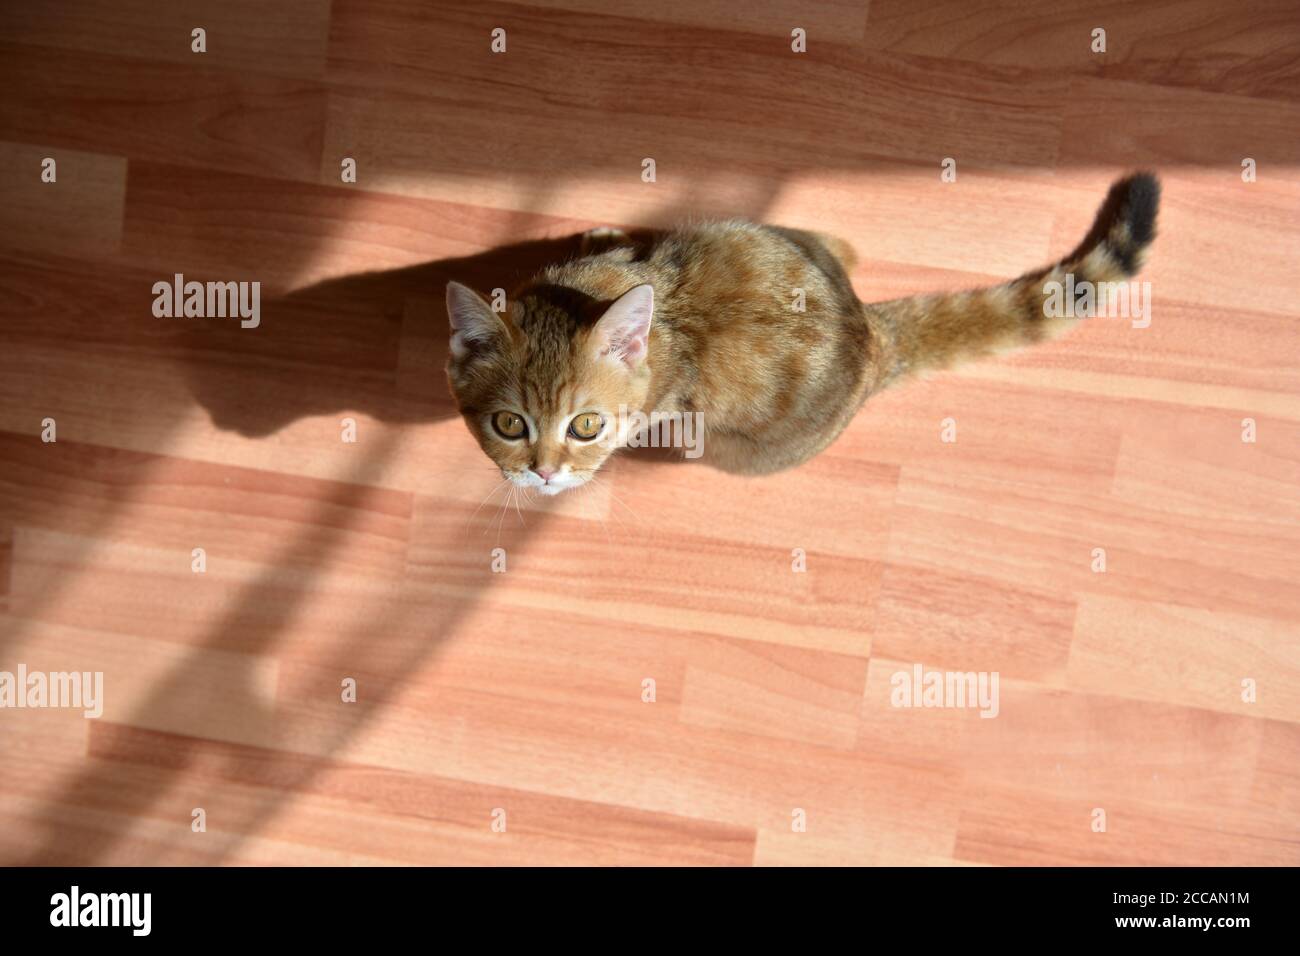 Little cute Scottish domestic kitten. Cat at home. Kitten  looks up. Cute red kitten. Animals or pets concept Stock Photo